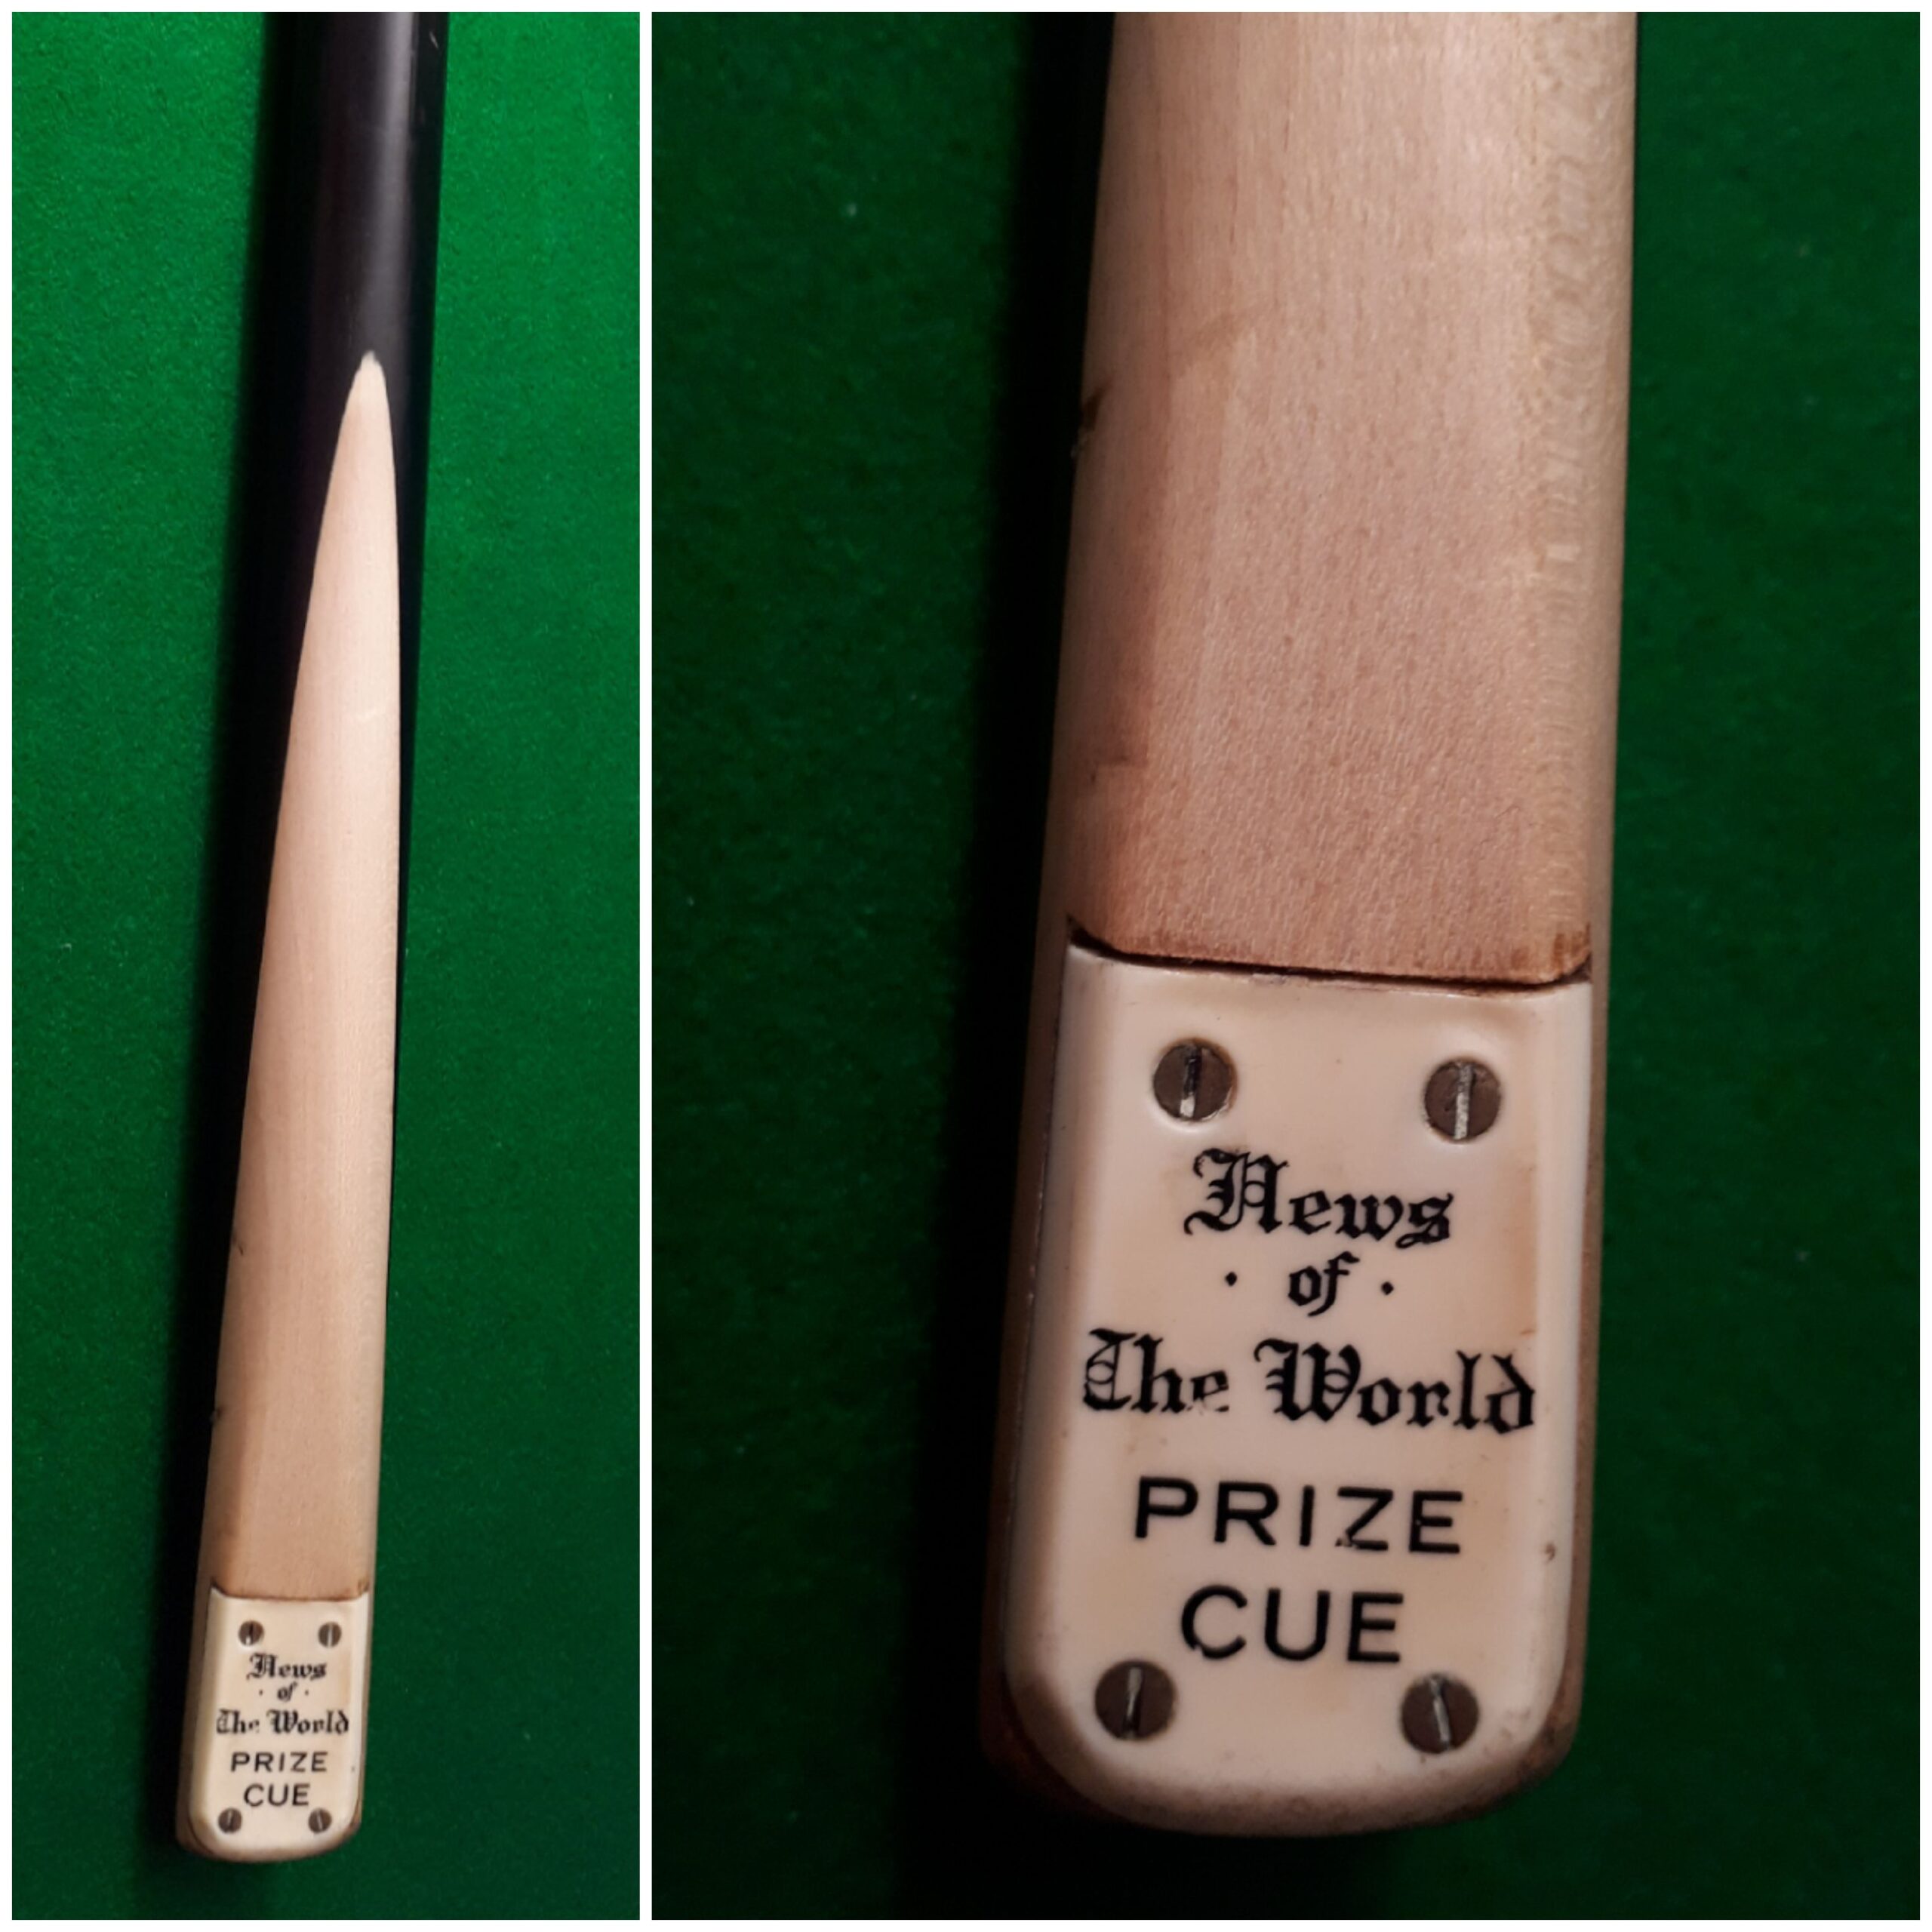 News of the World prize cue